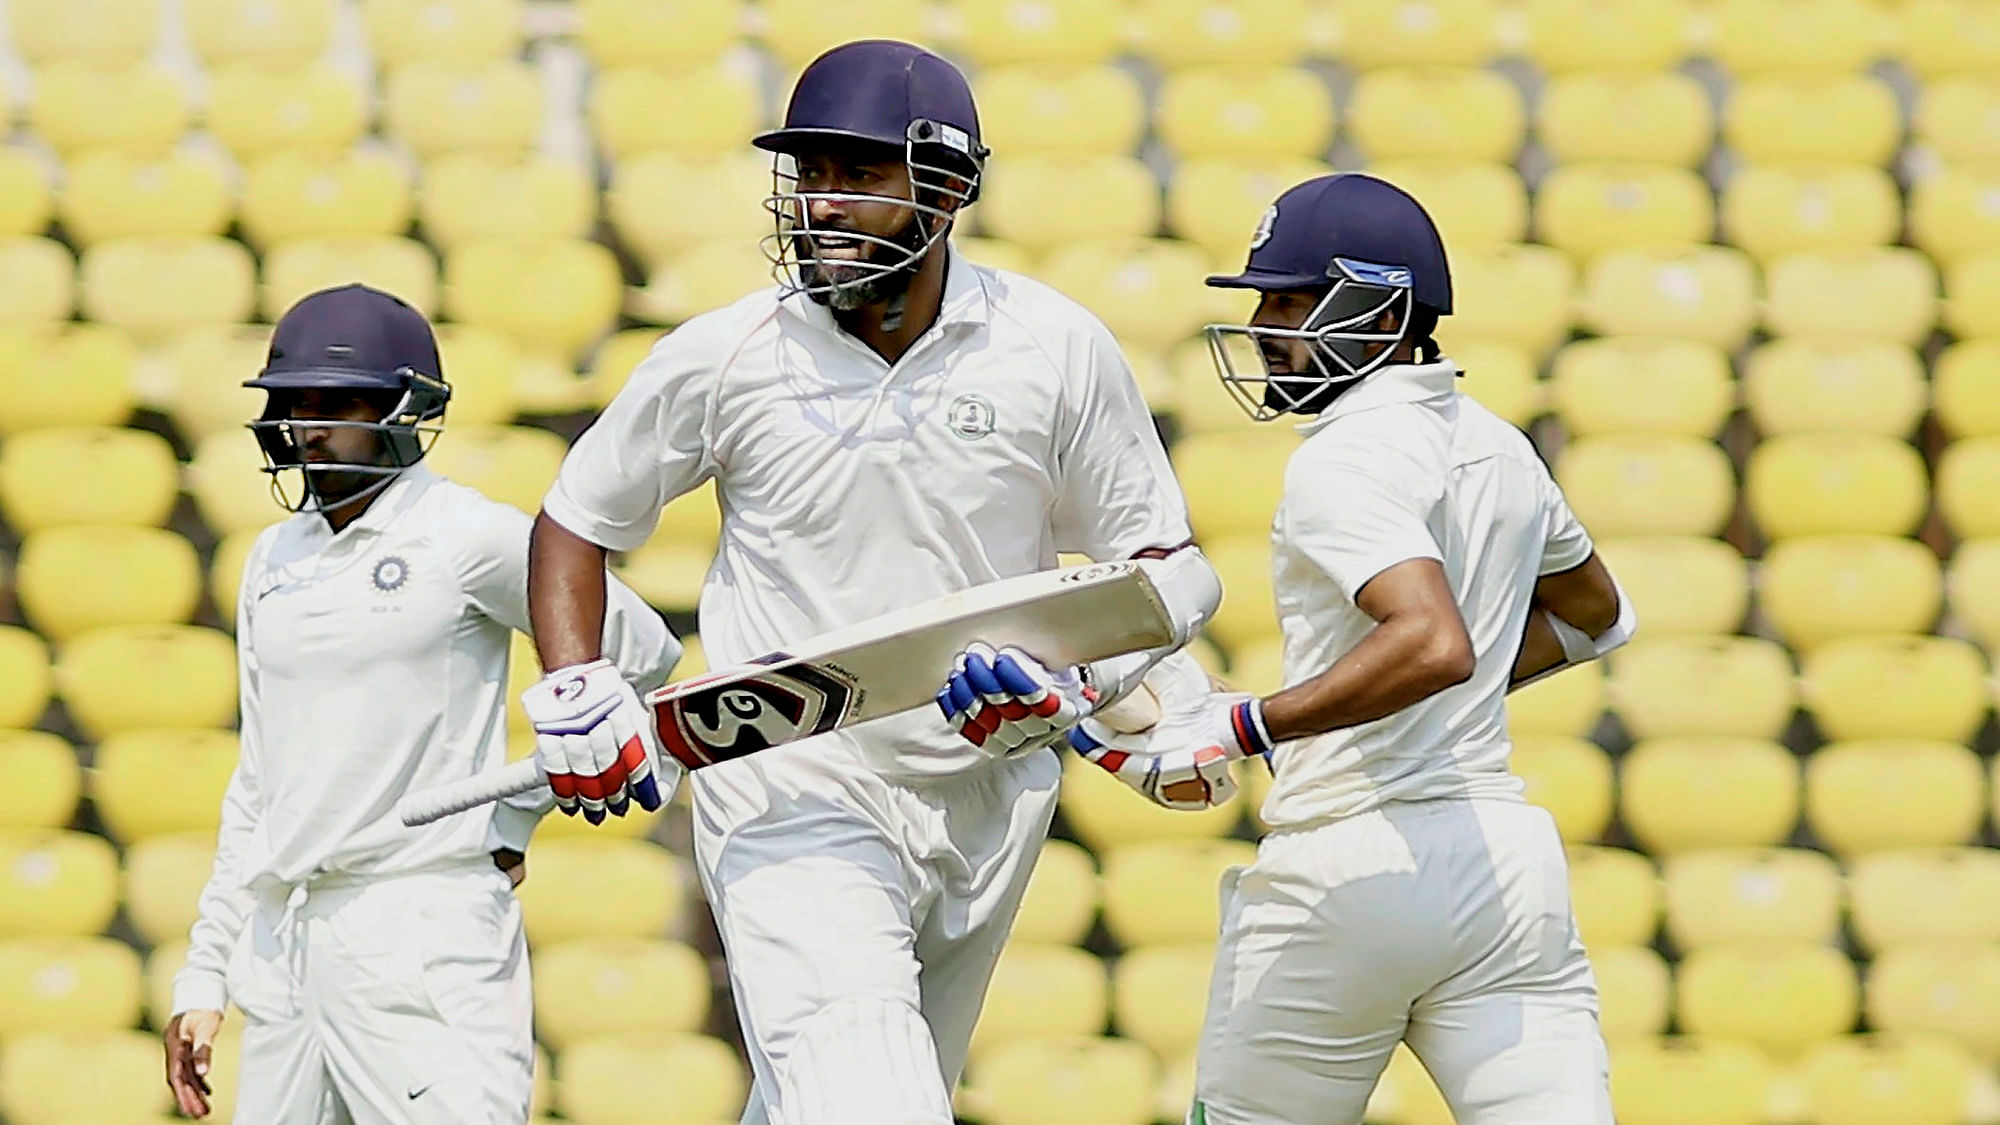 Wasim Jaffer scored 286 runs in the first innings of the Irani Cup match.